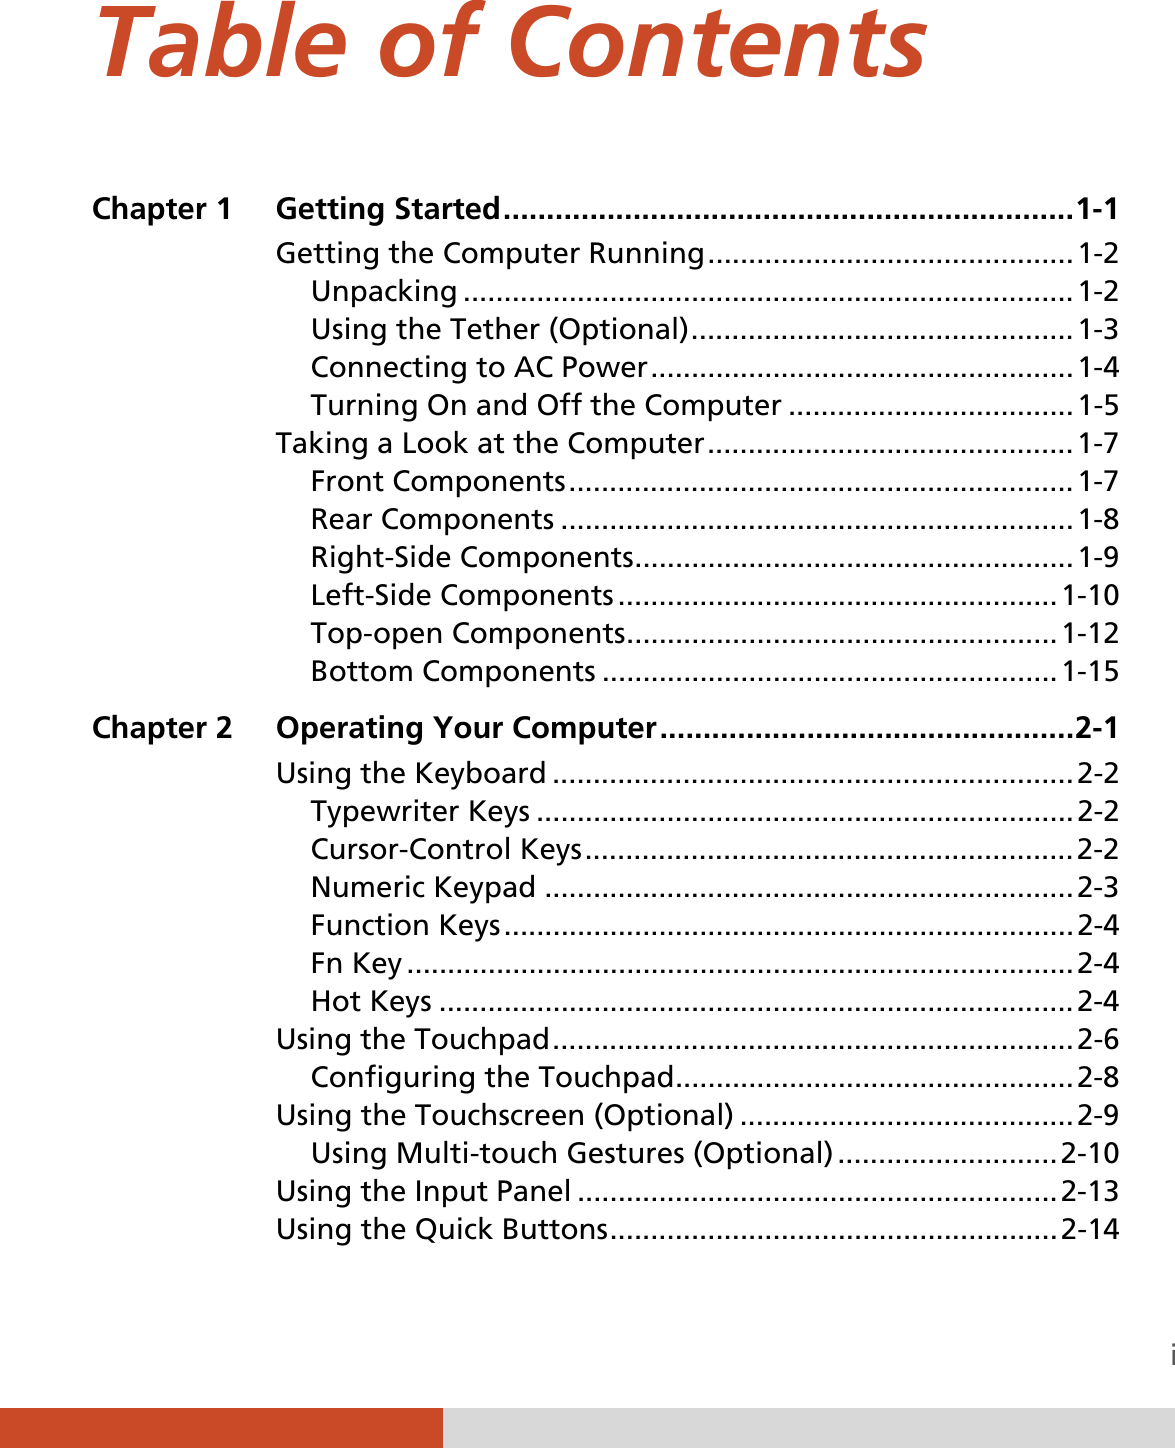  i Table of Contents Chapter 1  Getting Started .................................................................. 1-1Getting the Computer Running ............................................. 1-2Unpacking ........................................................................... 1-2Using the Tether (Optional) ...............................................  1-3Connecting to AC Power .................................................... 1-4Turning On and Off the Computer ................................... 1-5Taking a Look at the Computer ............................................. 1-7Front Components .............................................................. 1-7Rear Components ............................................................... 1-8Right-Side Components ...................................................... 1-9Left-Side Components ...................................................... 1-10Top-open Components ..................................................... 1-12Bottom Components ........................................................ 1-15Chapter 2  Operating Your Computer ................................................ 2-1Using the Keyboard ................................................................ 2-2Typewriter Keys .................................................................. 2-2Cursor-Control Keys ............................................................ 2-2Numeric Keypad ................................................................. 2-3Function  Keys ...................................................................... 2-4Fn Key .................................................................................. 2-4Hot Keys .............................................................................. 2-4Using the Touchpad ................................................................ 2-6Configuring the Touchpad ................................................. 2-8Using the Touchscreen (Optional) ......................................... 2-9Using Multi-touch Gestures (Optional) ........................... 2-10Using the Input Panel ........................................................... 2-13Using the Quick Buttons .......................................................  2-14